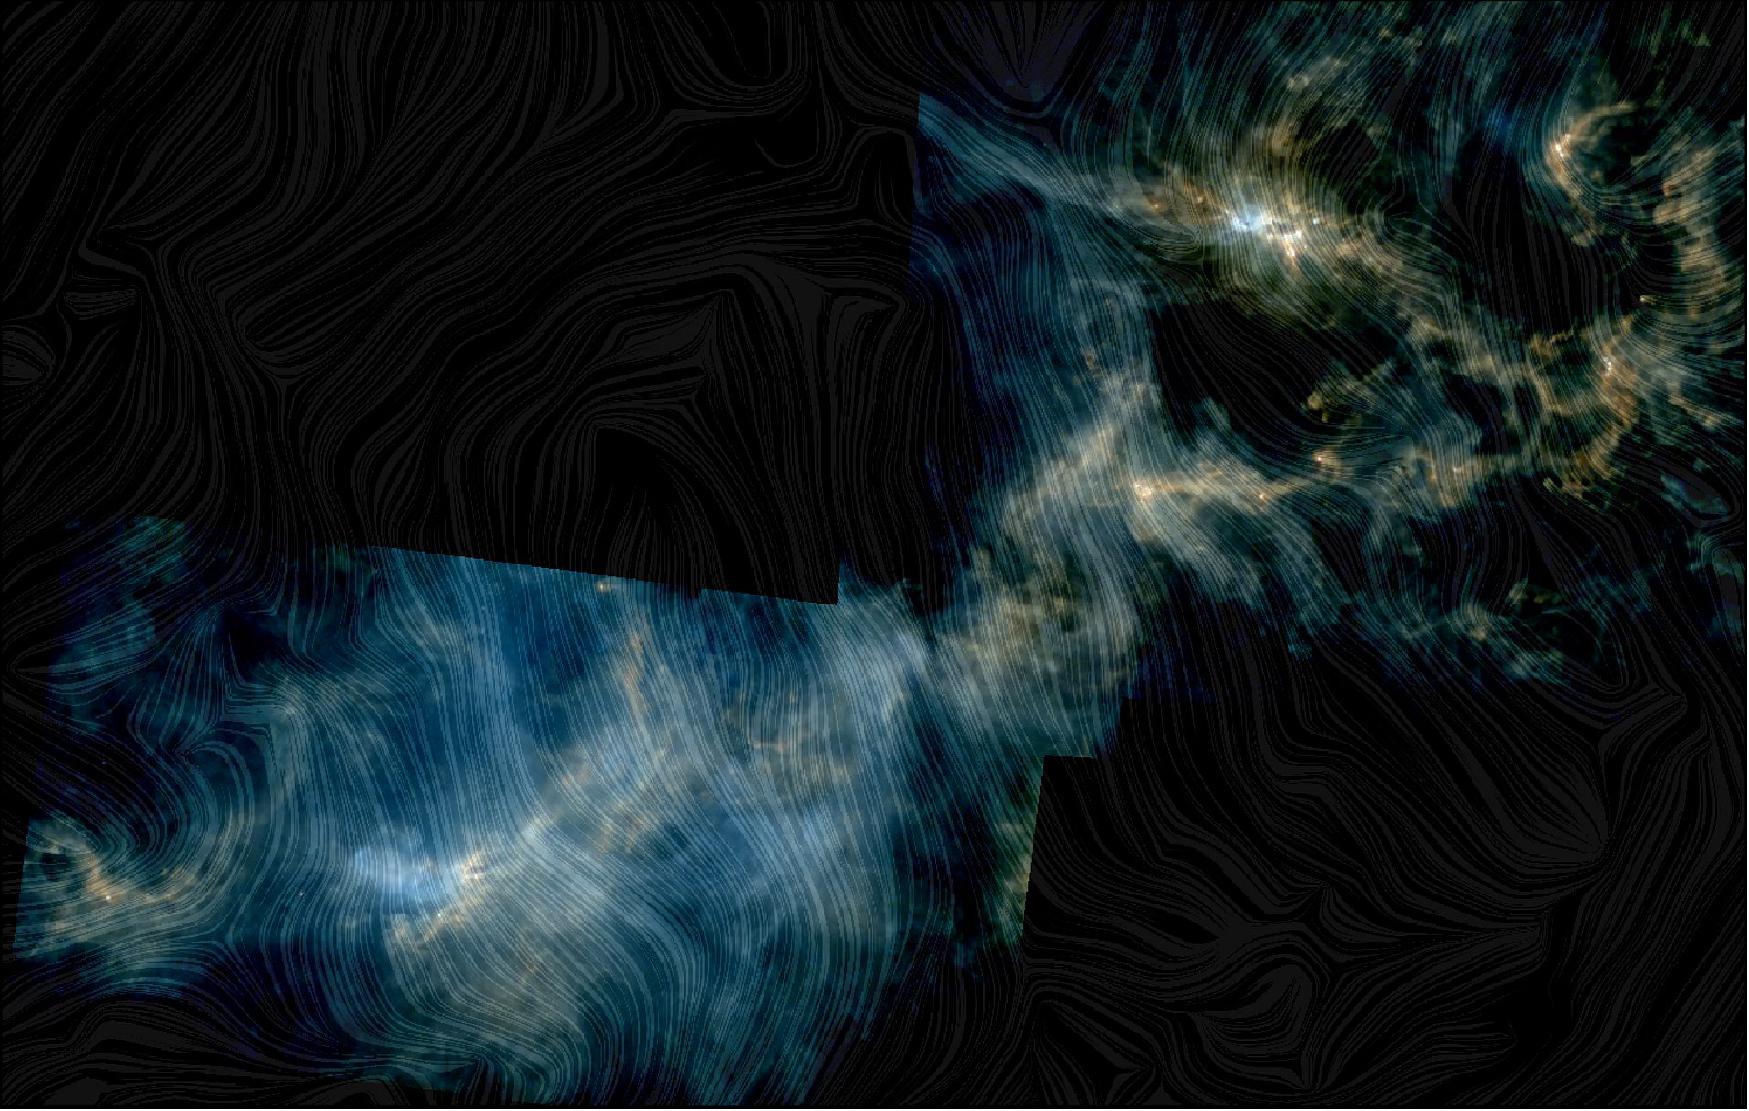 Figure 18: The Perseus molecular cloud viewed by Herschel and Planck. This image shows the Perseus molecular cloud, based on a combination of data from ESA’s Herschel and Planck space telescopes. The bright areas in the picture shows the emission by interstellar dust grains in three different wavelengths observed by Herschel (250, 350, and 500 µm) and the lines crossing the image in a ‘drapery pattern’ represent the magnetic field orientation (based on the Planck data). This nearby molecular cloud complex is made up of two components, Perseus North and Perseus South, both of which contain a large amount of dark nebulae. The northern component is located in the lower left of the image, while the southern one is visible towards the upper right. Perseus North includes B5 which is an extensively studied dark cloud, and also contains the IC 348 open cluster of stars. Perseus South is home to the NGC 1333 nebula – the brightest area in the image – which is one of the most actively star-forming regions in the complex. Perseus South also includes the Barnard Object B1, along with the Lynds Dark Nebulae L1448, L1455, and L1451 (image credit: ESA/Herschel/Planck; J. D. Soler, MPIA)